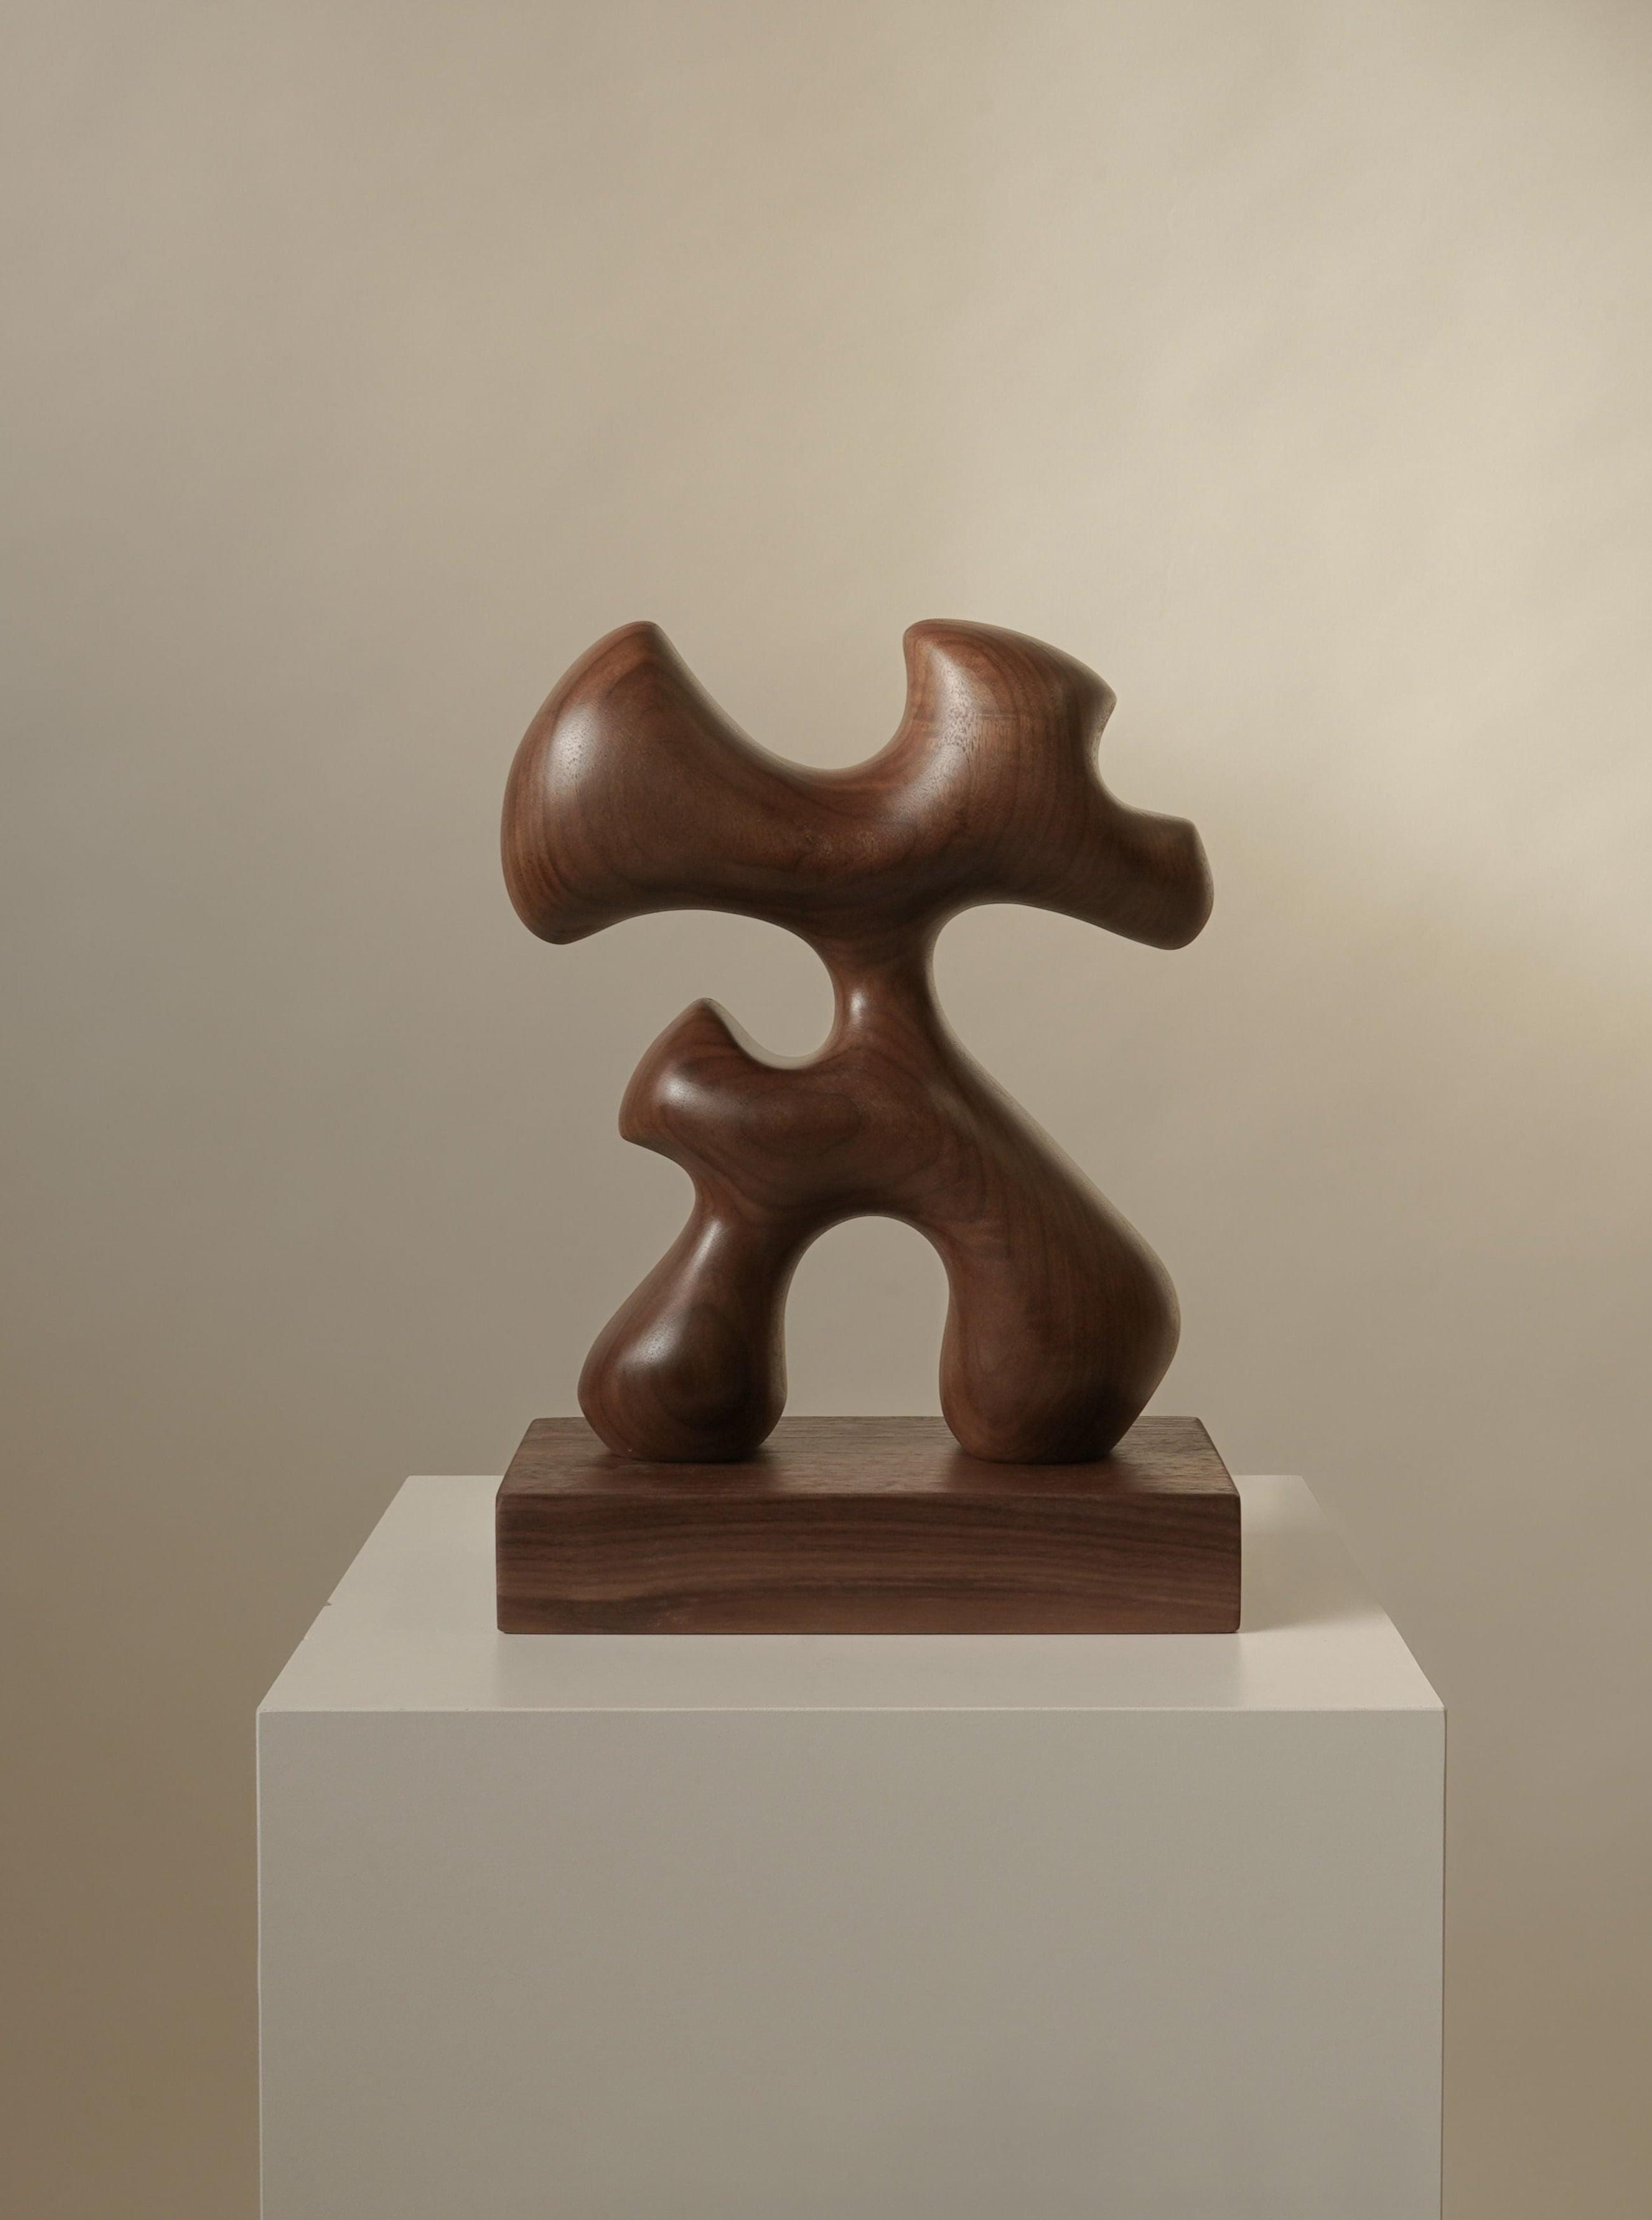 Abstract Abari wood sculpture with fluid, interlocking shapes, displayed on a white pedestal against a neutral beige background by Chandler McLellan.